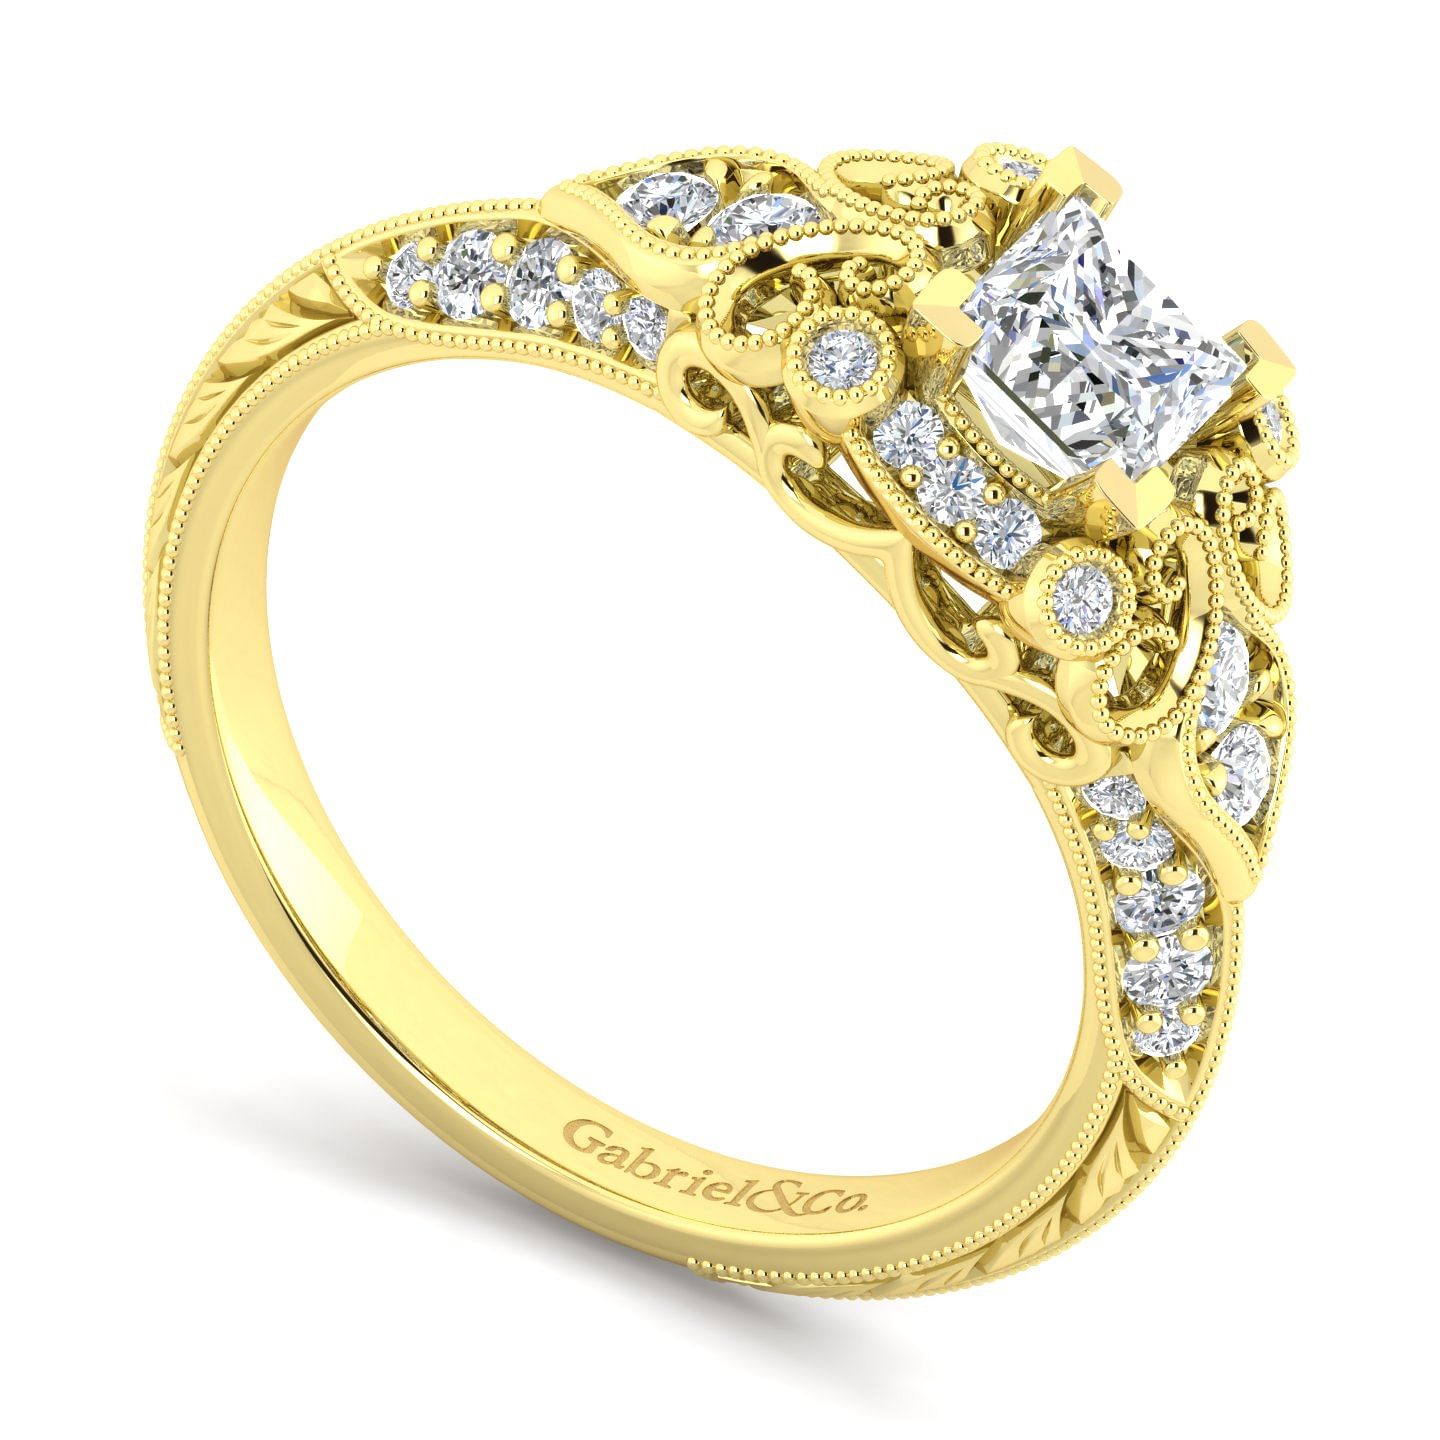 Unique 14K Yellow Gold Vintage Inspired Princess Cut Diamond Halo Engagement Ring